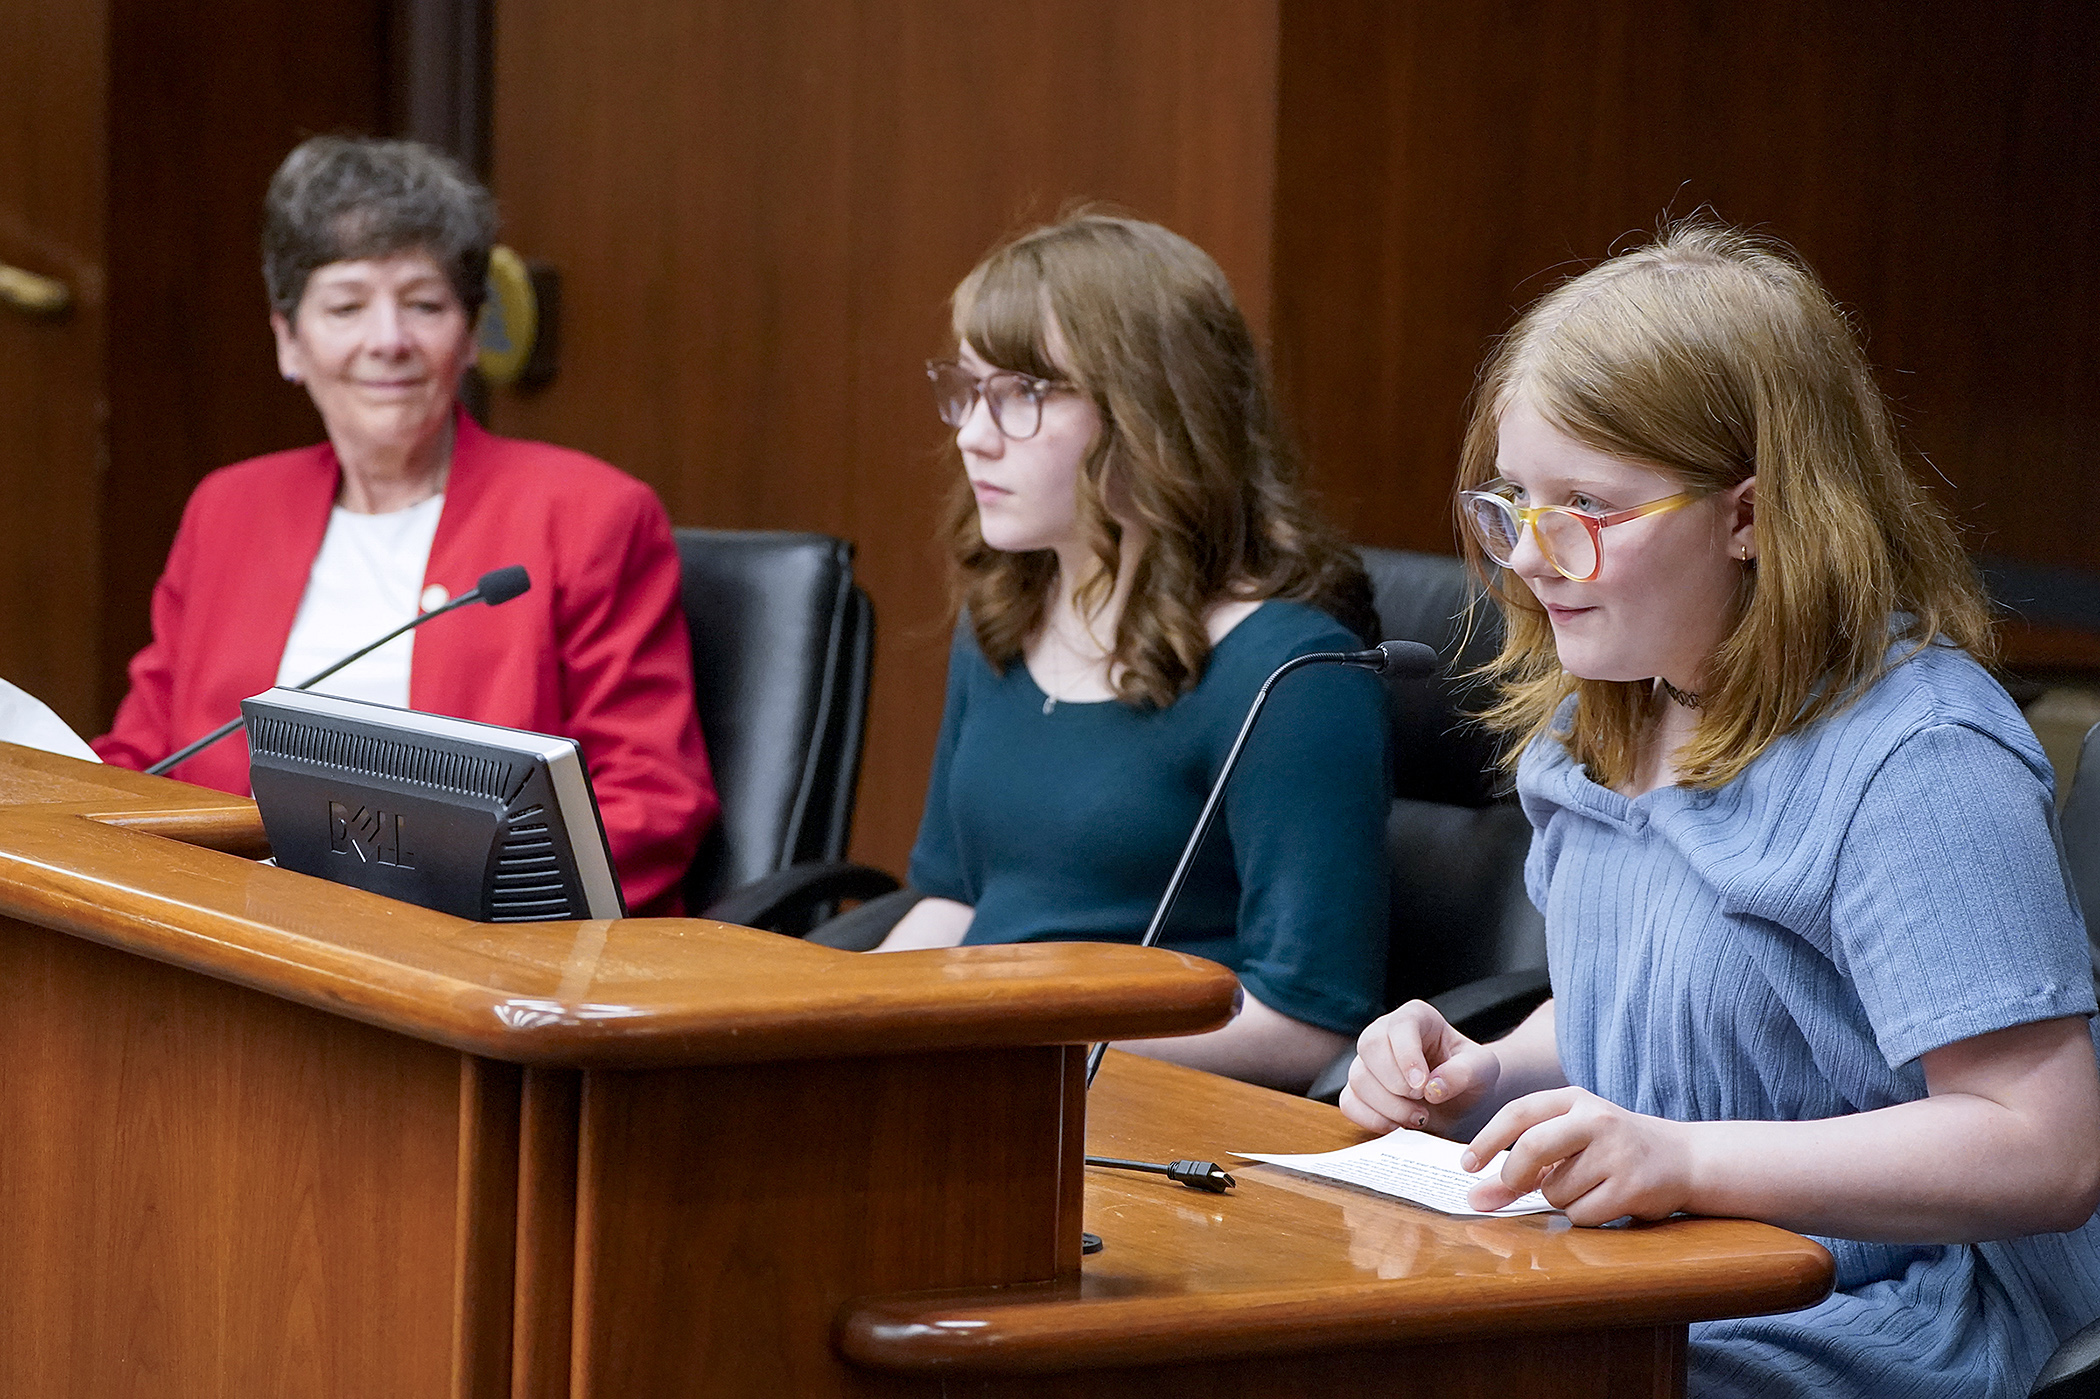 Winifred LaPorte, 11, right, testifies alongside her older sister Genevieve, 12, before the House veterans committee March 11, in support of HF4451. Rep. Peggy Bennett is the sponsor. (Photo by Michele Jokinen)